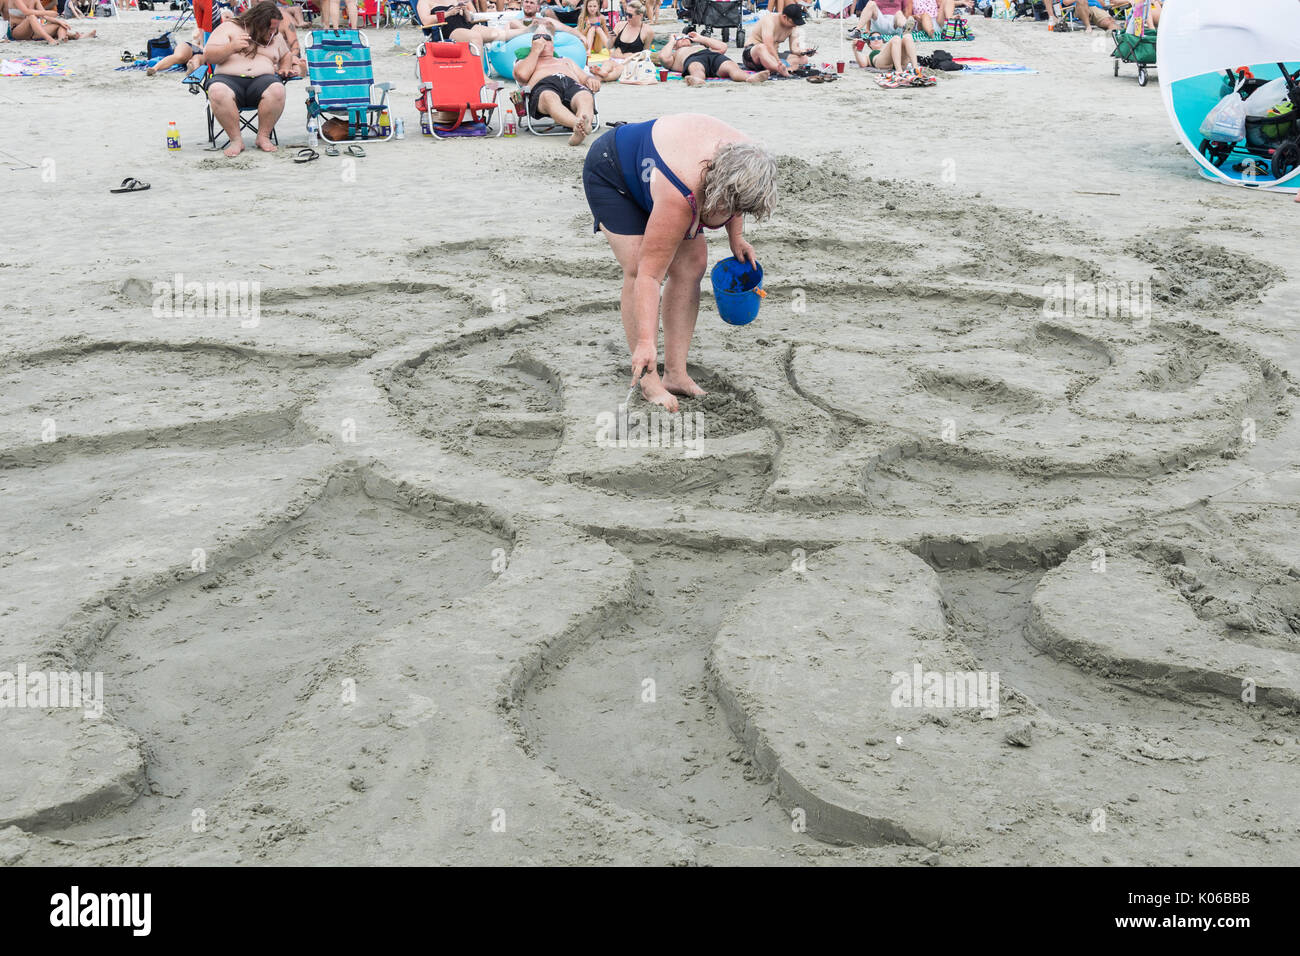 Charleston, Isle of Palms, USA. 21st Aug, 2017. A woman finishes a design in the sand to celebrate the total solar eclipse as thousands gather on the beach outside Charleston August 21, 2017 in Isle of Palms, South Carolina. The solar eclipse after sweeping across the nation crosses the Charleston area before heading over the Atlantic Ocean. Credit: Planetpix/Alamy Live News Stock Photo